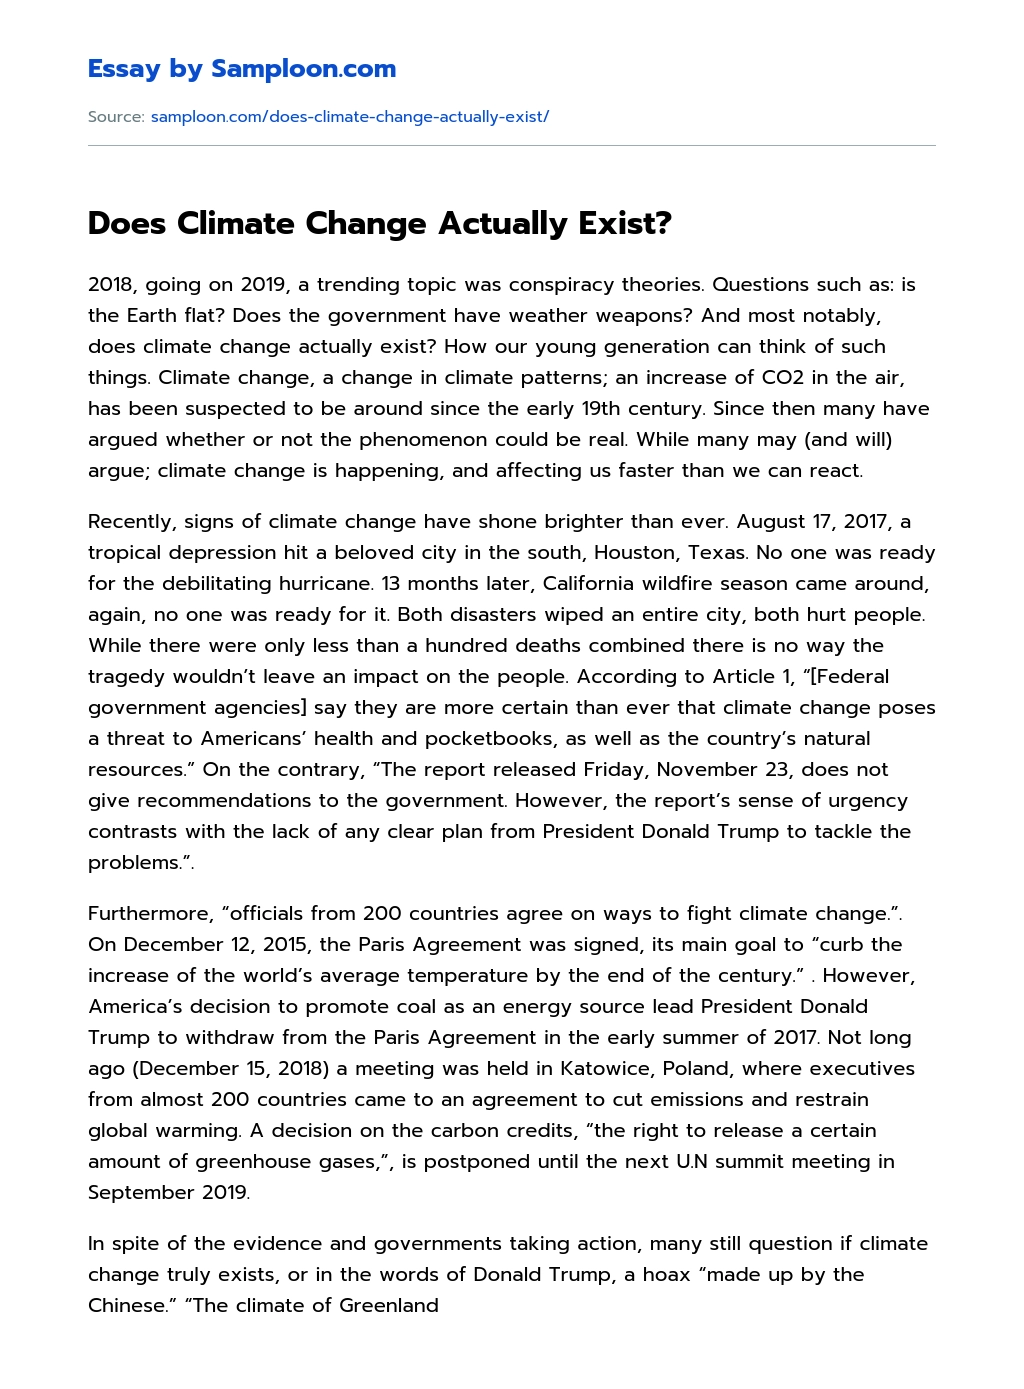 Does Climate Change Actually Exist? essay